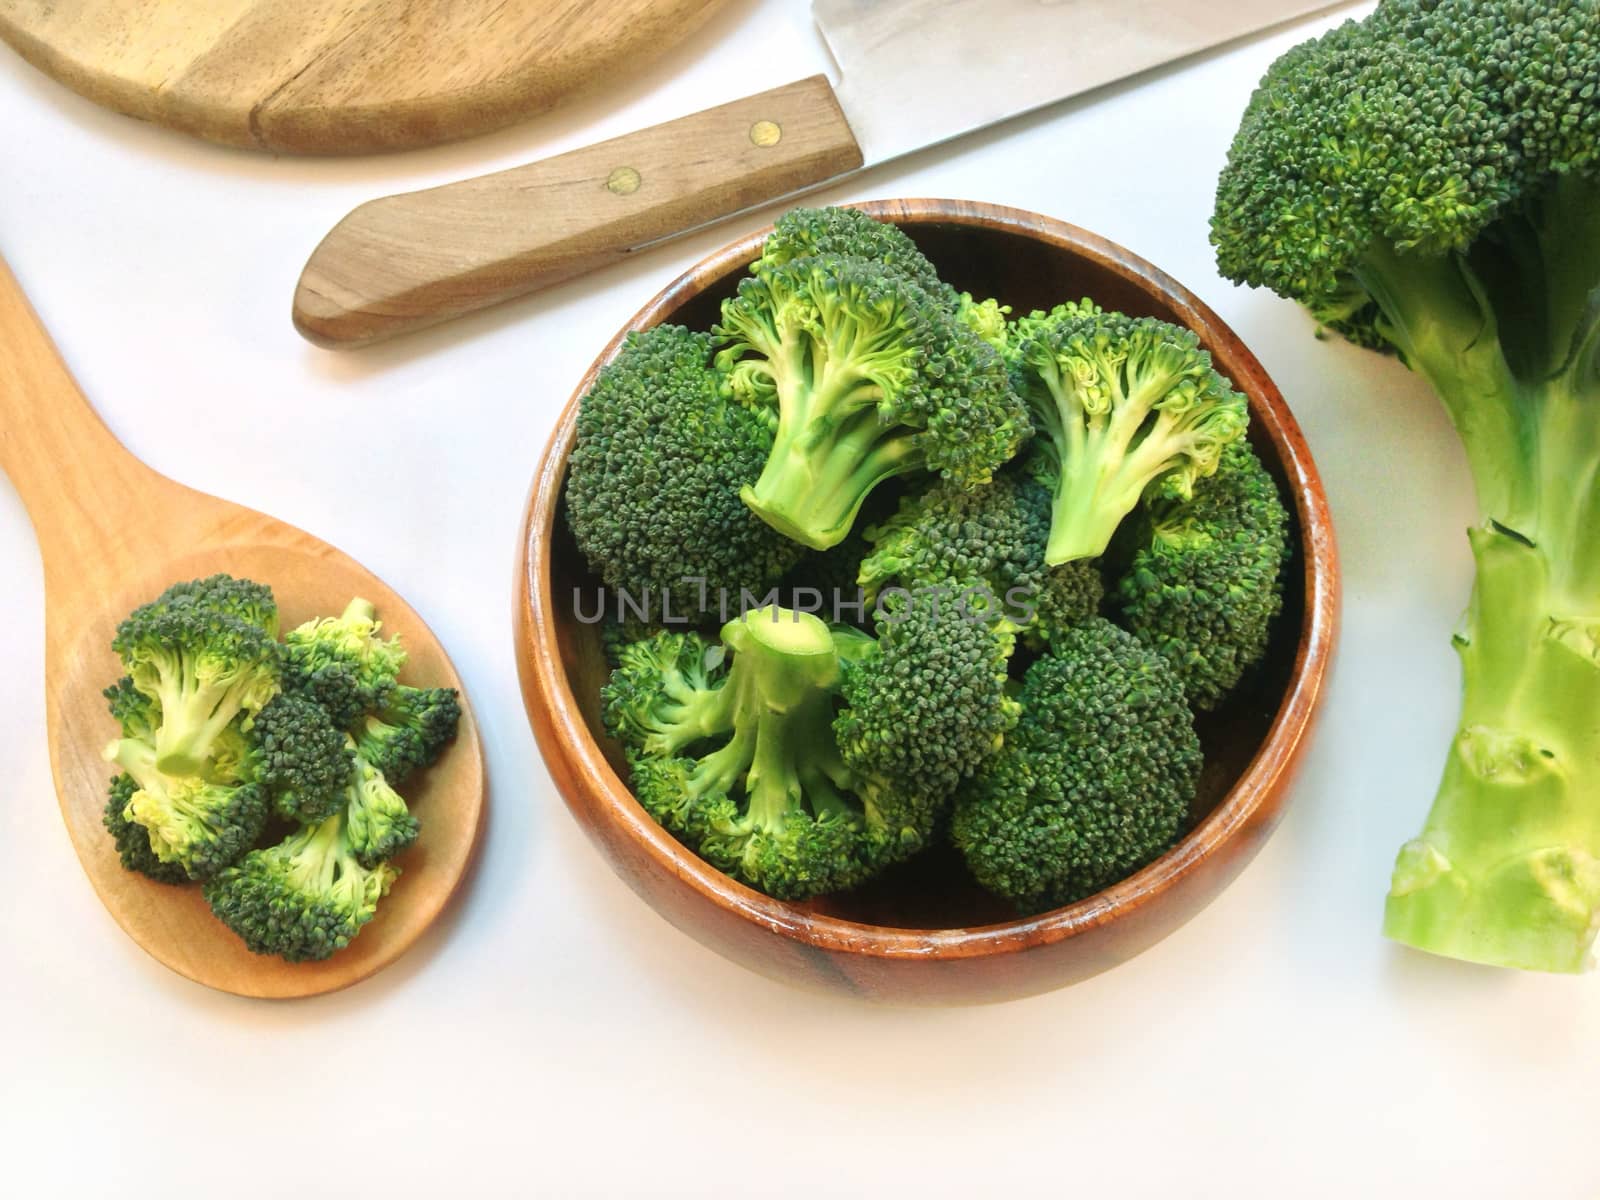 Broccoli on wooden ladle and wooden bowl, cutting board, knife o by Bowonpat